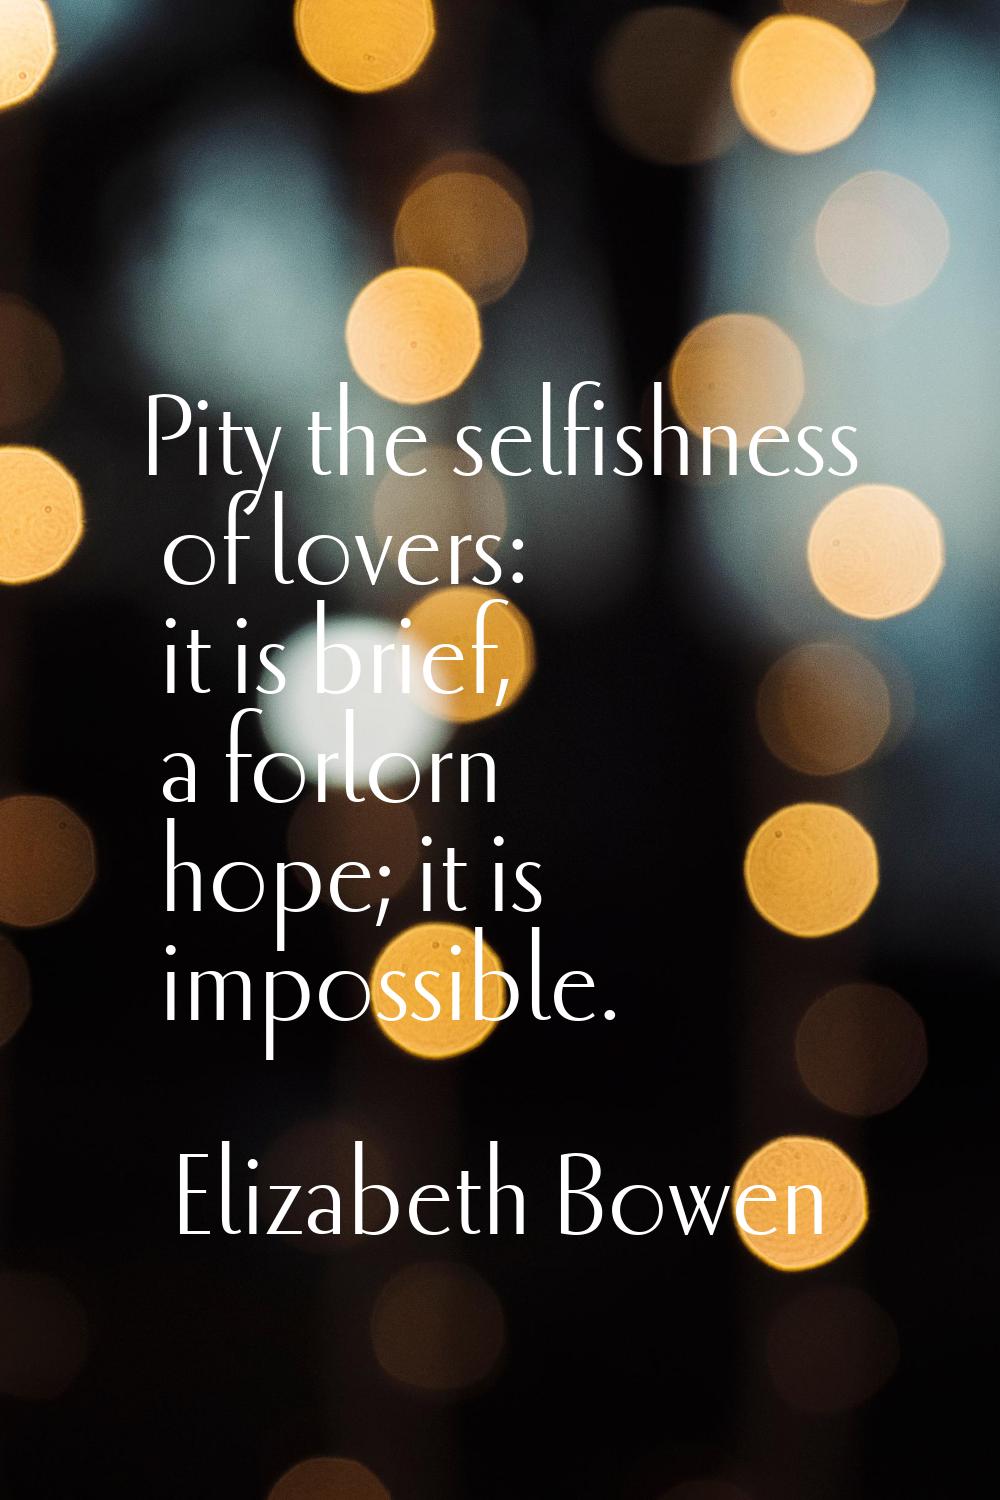 Pity the selfishness of lovers: it is brief, a forlorn hope; it is impossible.